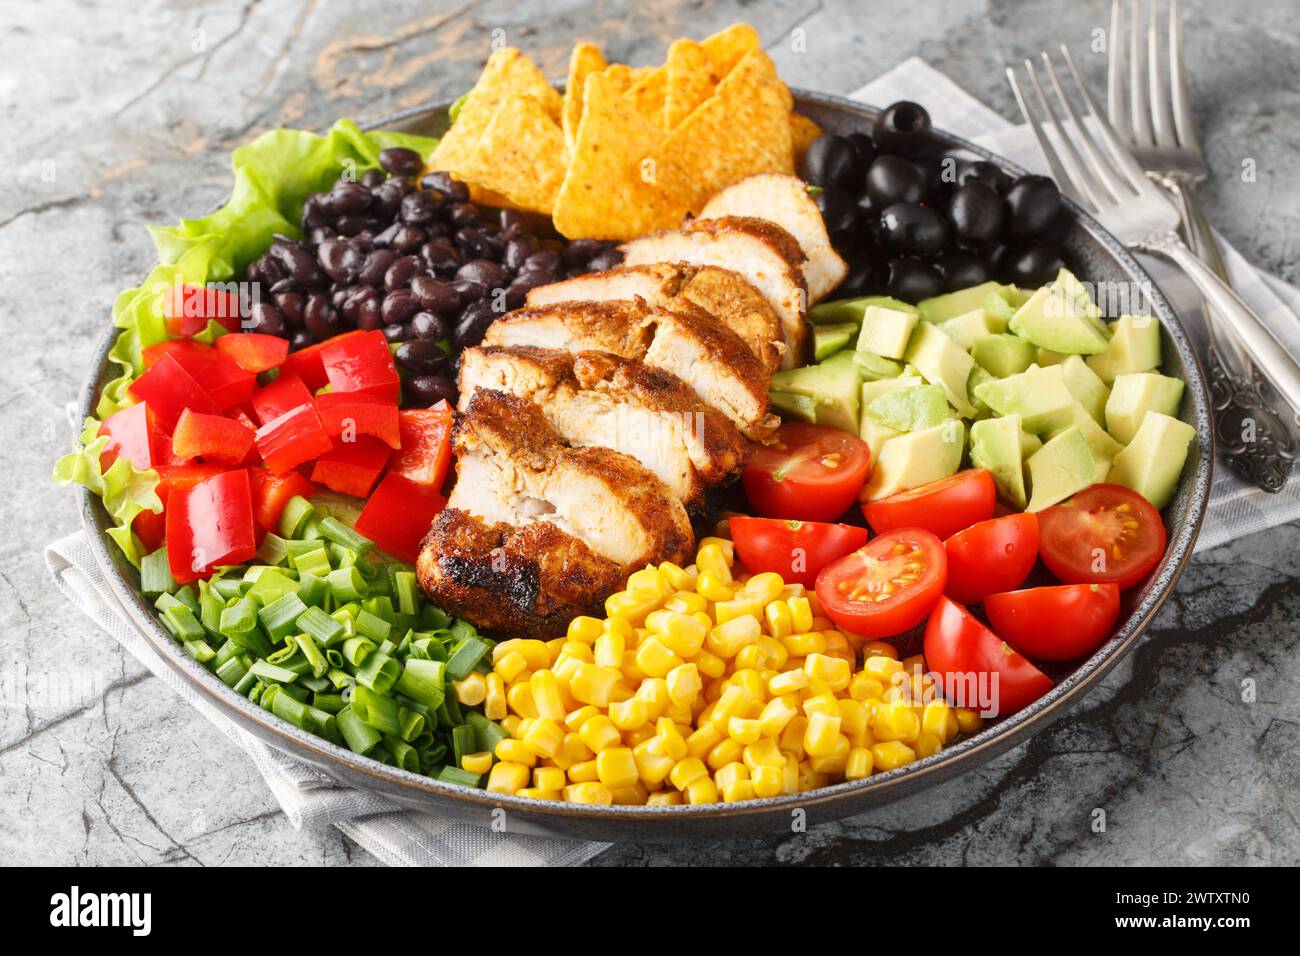 Tex-Mex Santa Fe chicken salad with lettuce, tomatoes, corn, black beans, pepper, avocado, olive closeup on the plate on the table. Horizontal Stock Photo